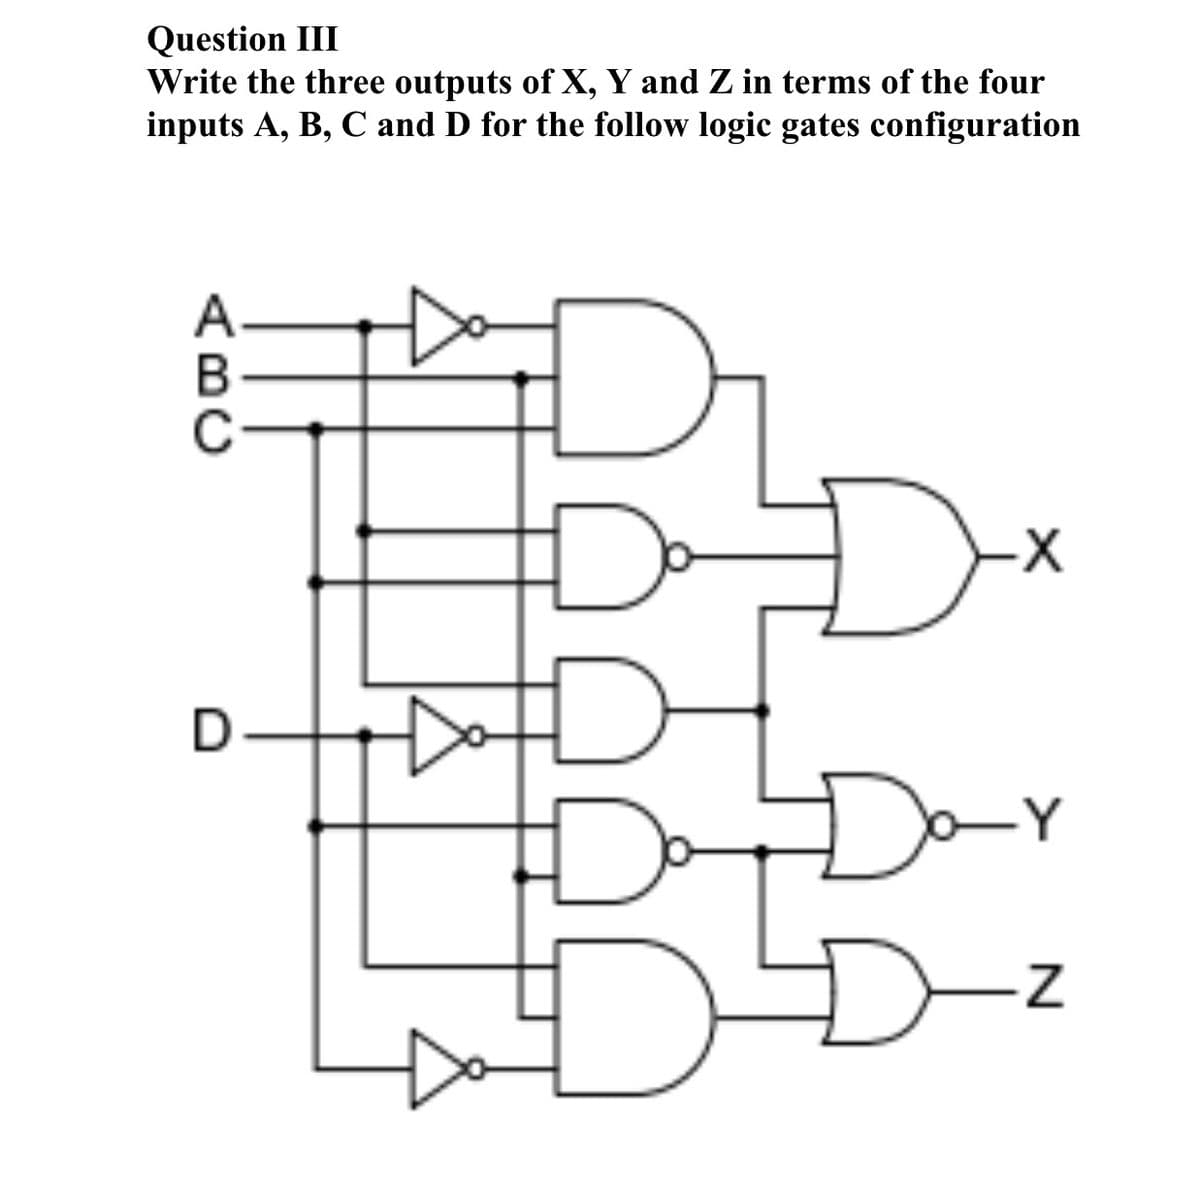 Question III
Write the three outputs of X, Y and Z in terms of the four
inputs A, B, C and D for the follow logic gates configuration
Dx
Day
D-z
ABC
